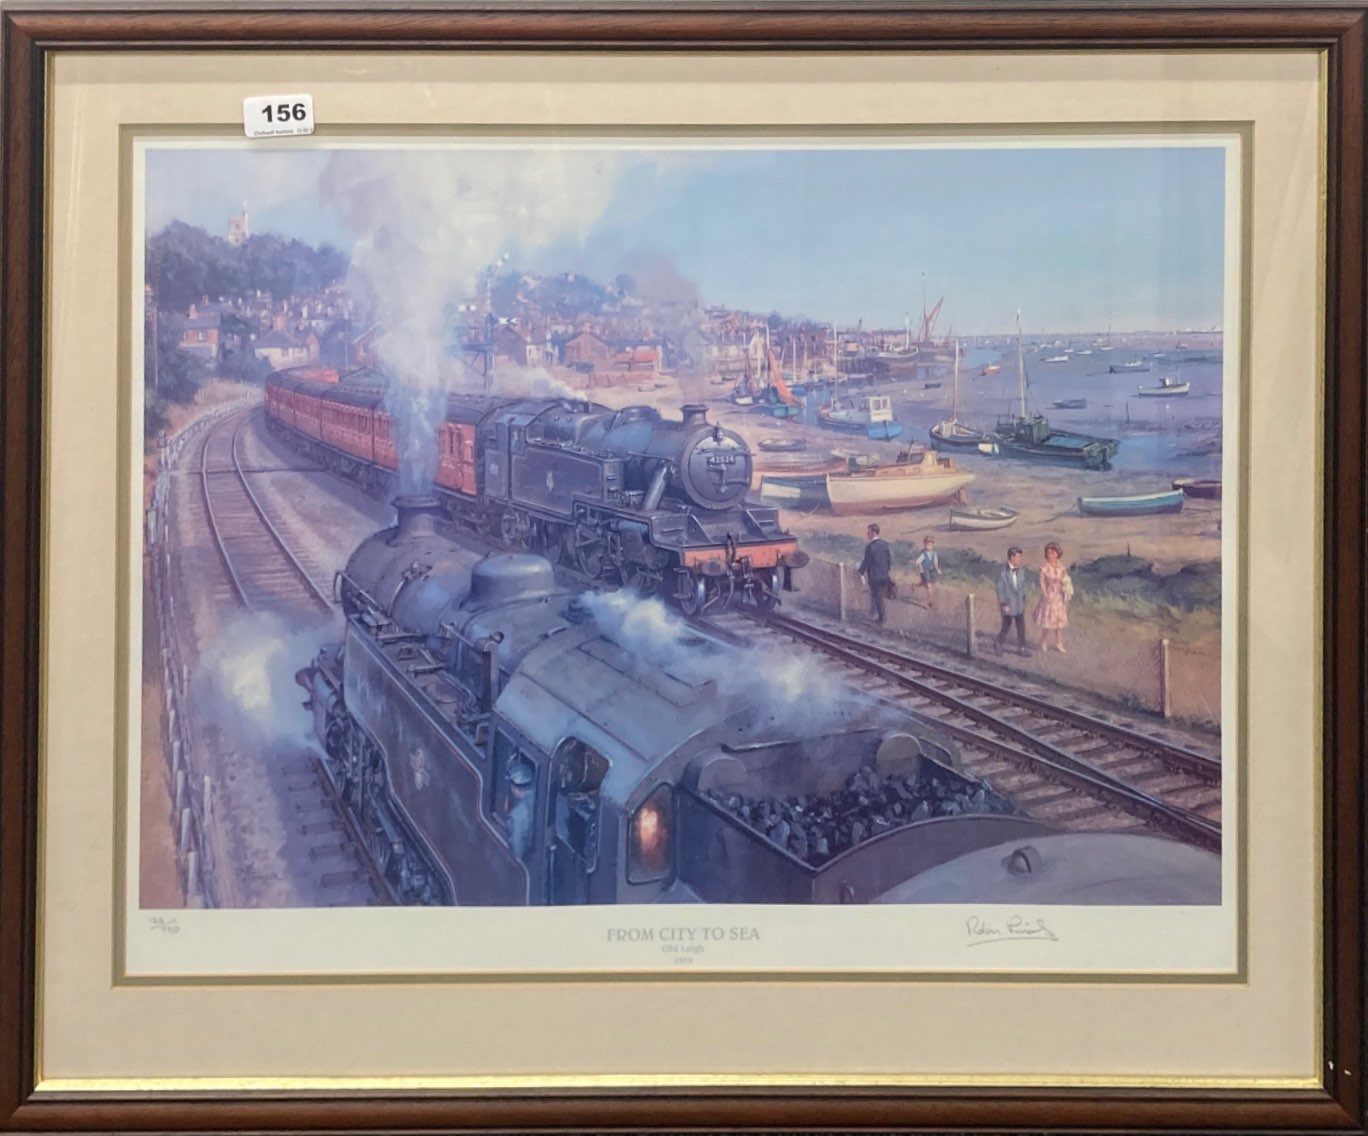 A framed pencil signed limited edition 125/750 print 'From City to Sea, Old Leigh 1959' by RJ